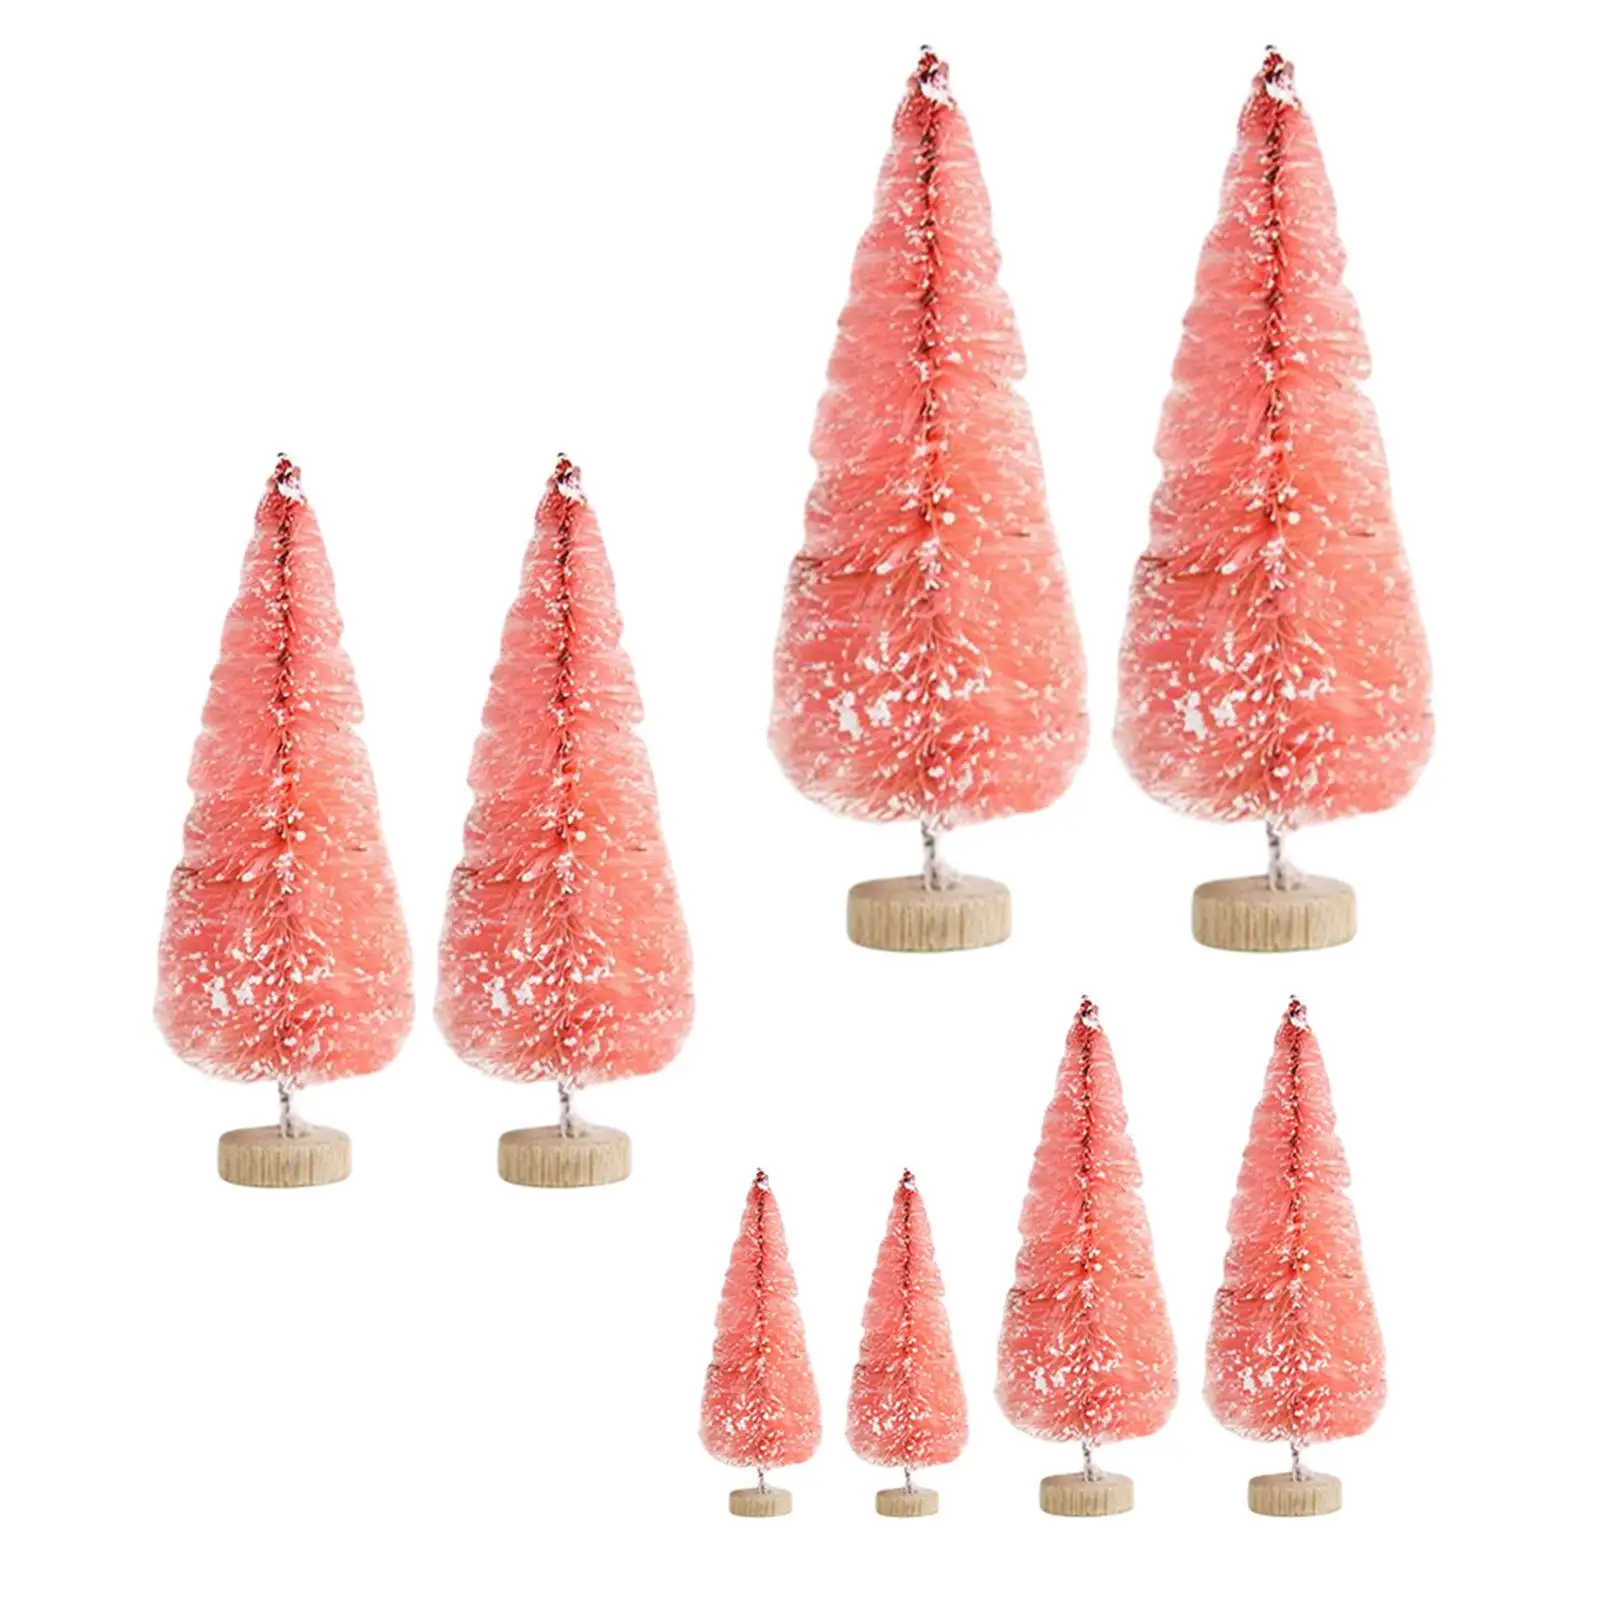 8x Mini Artificial Christmas Brush Trees Ornaments for Holiday